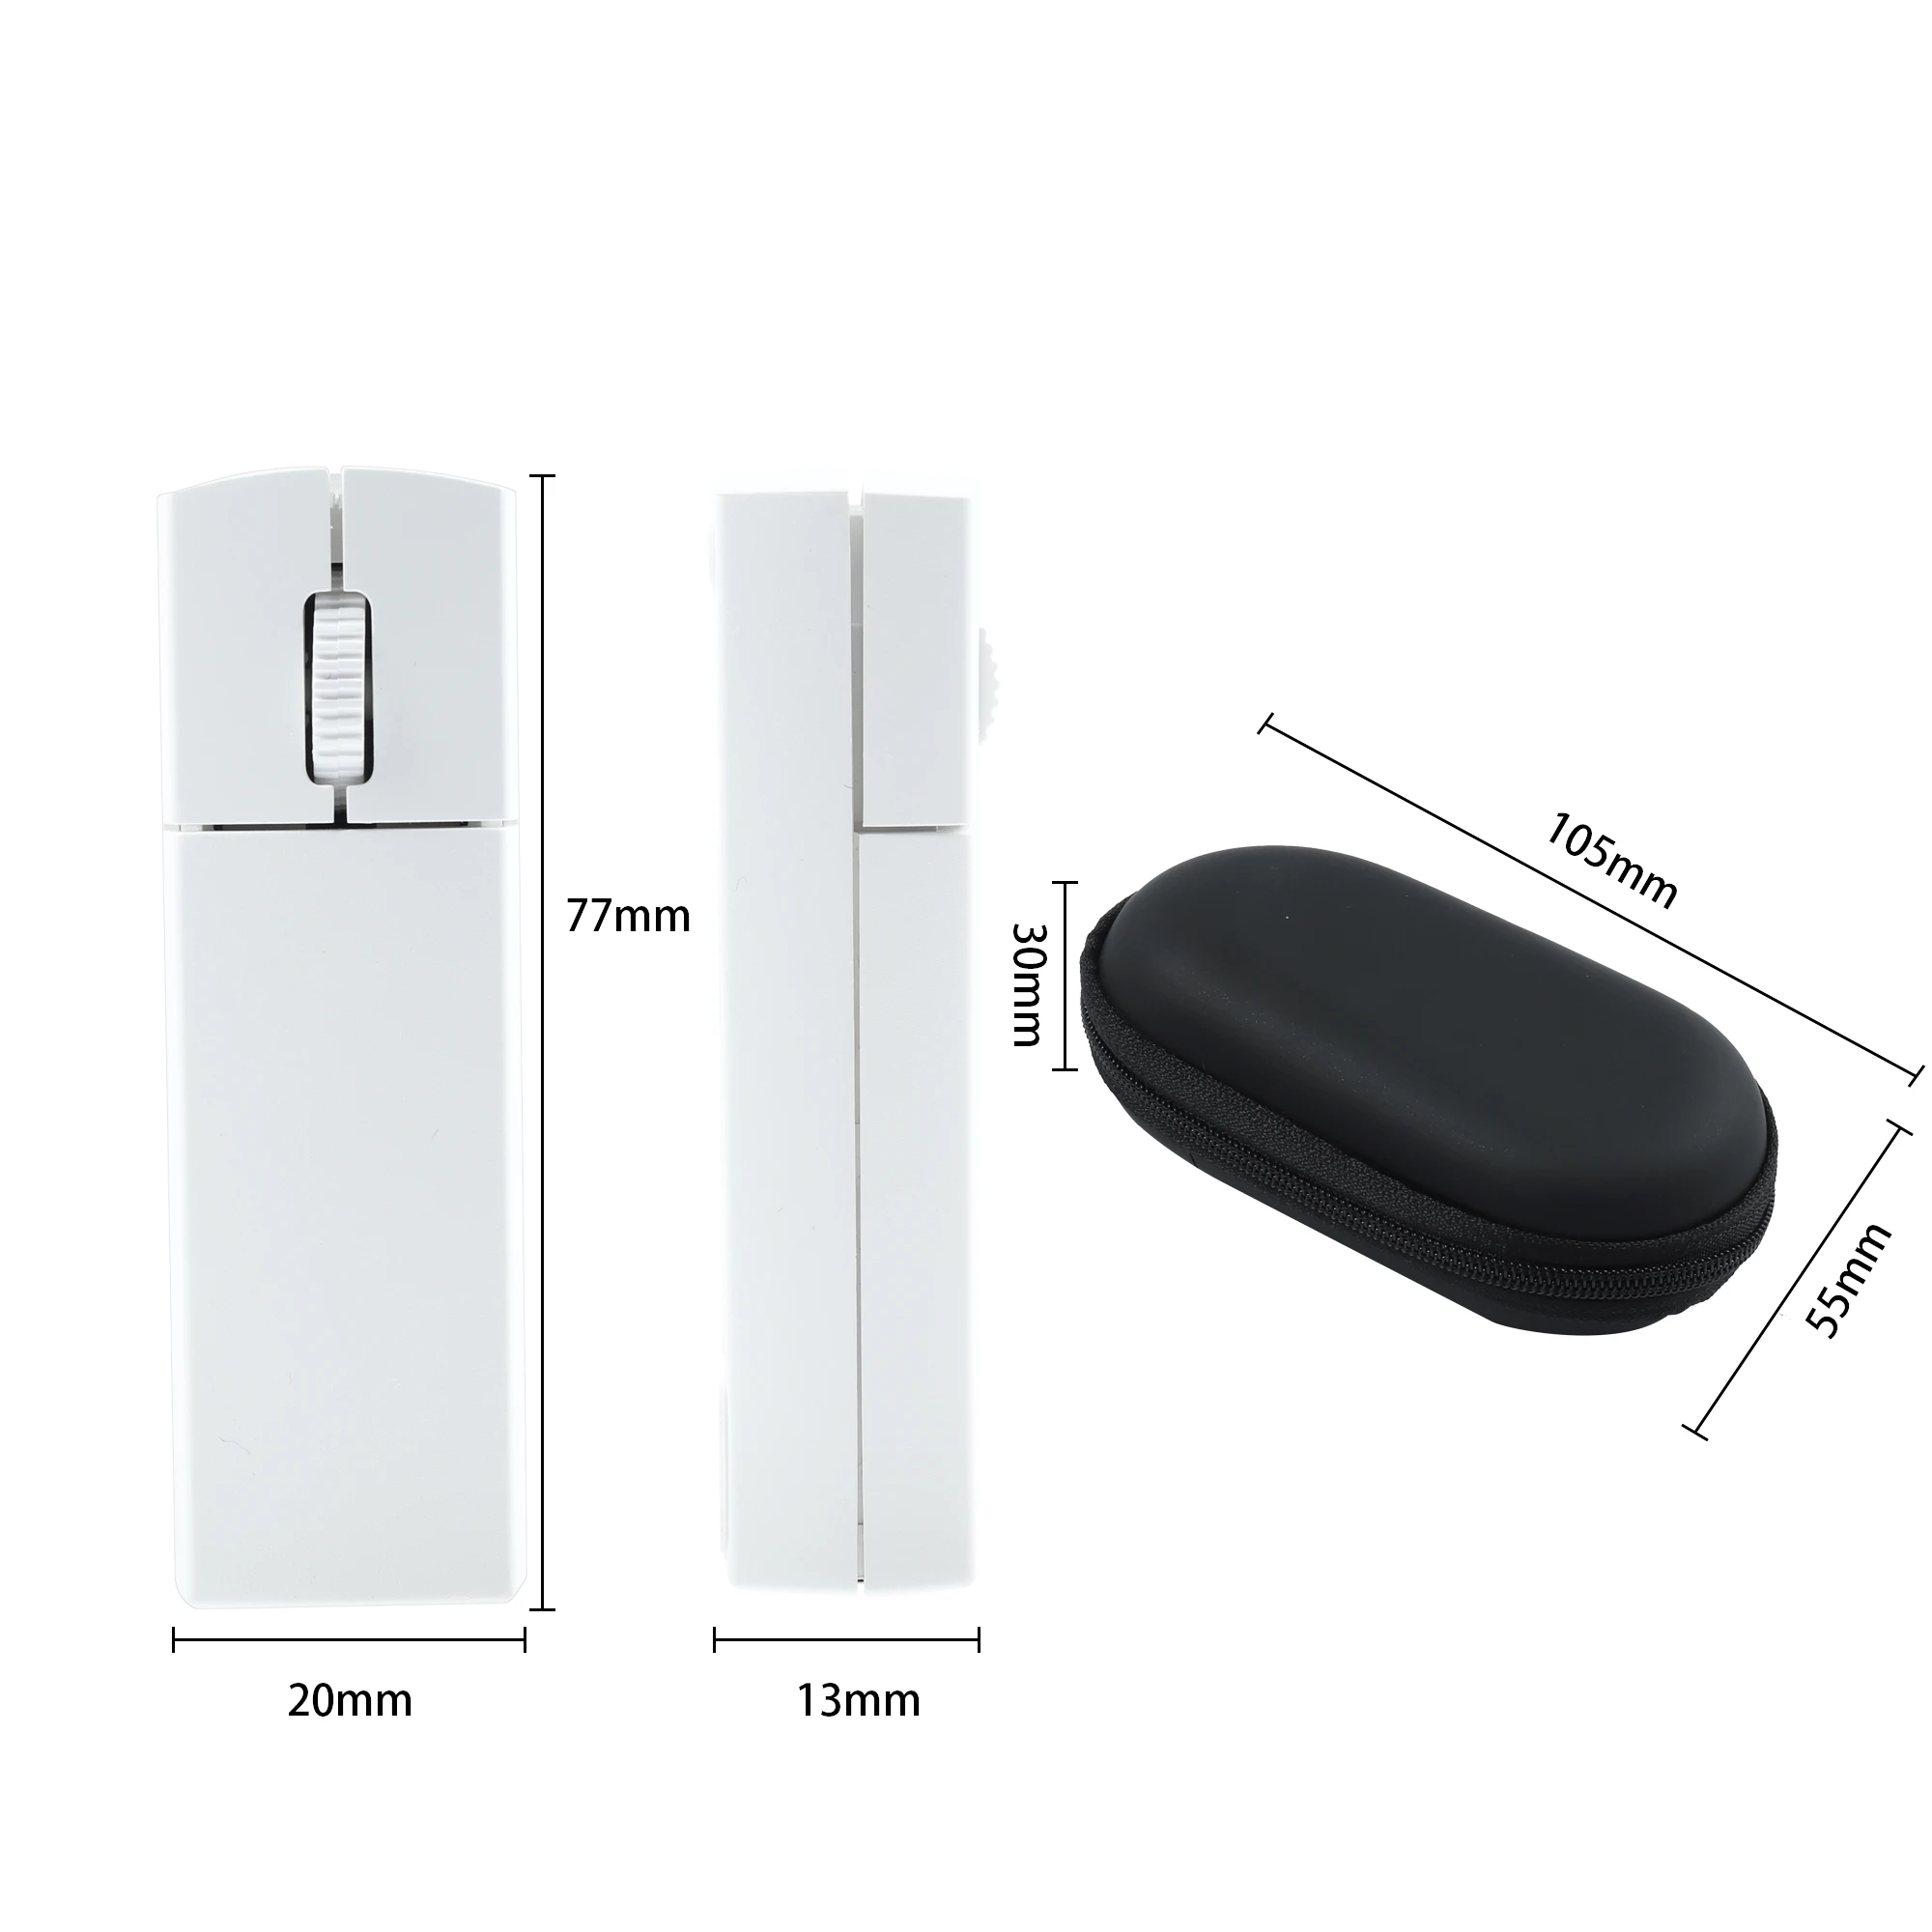 2.4G Wireless Mute Button Mini Office Mouse Rechargeable Harging Suitable For Home Office PC,Laptop Mini Mouse(With Mouse Box)